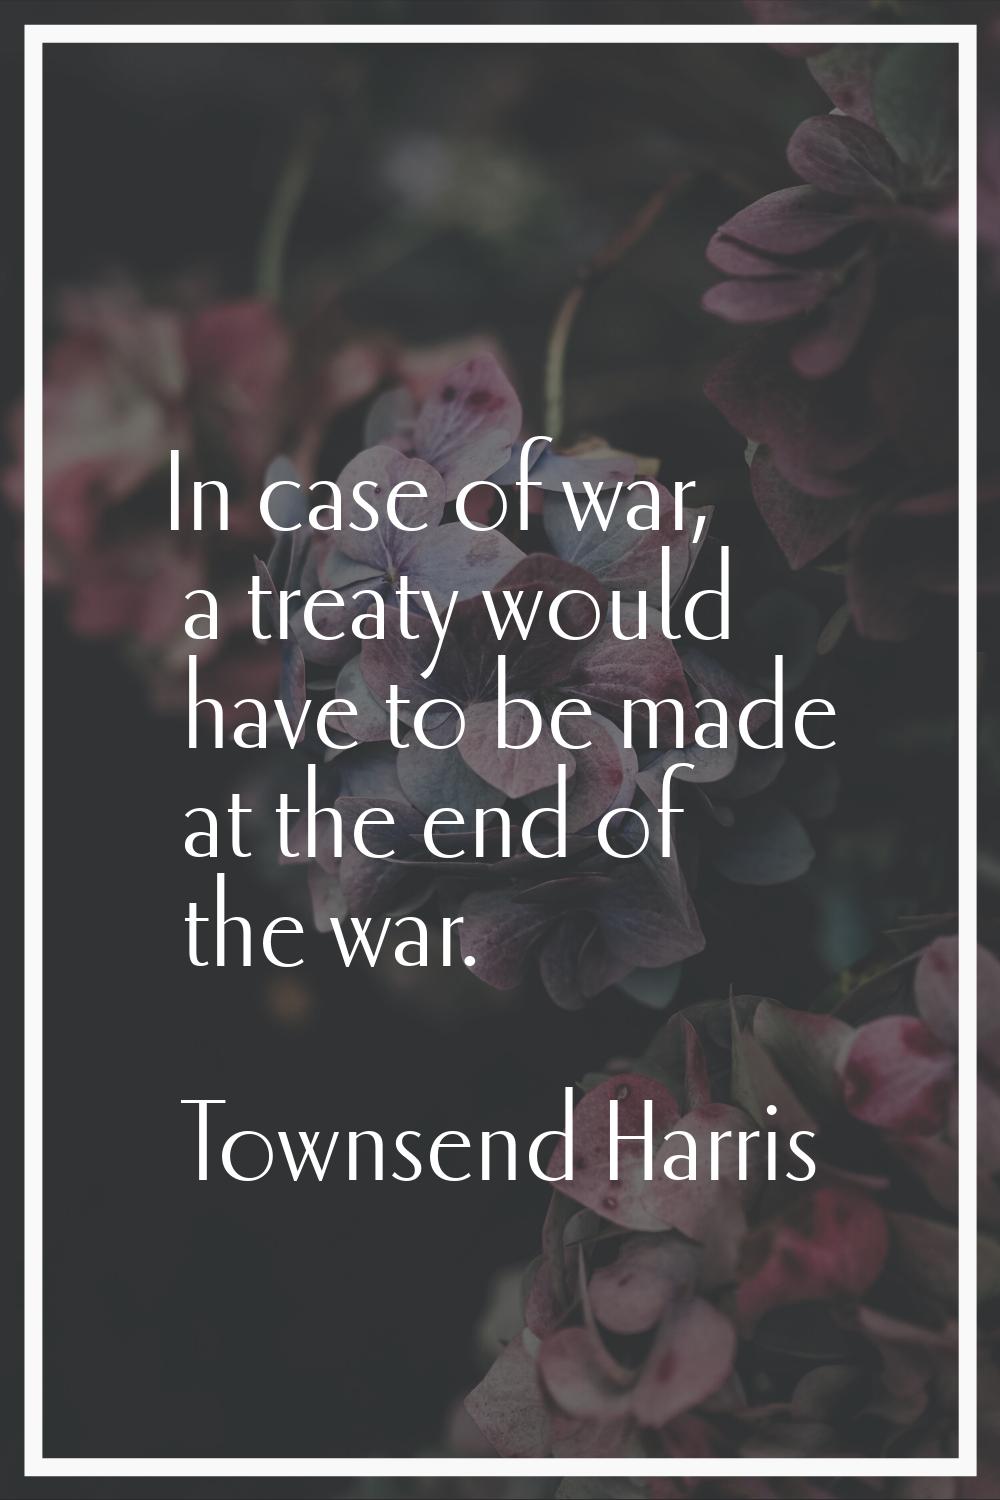 In case of war, a treaty would have to be made at the end of the war.